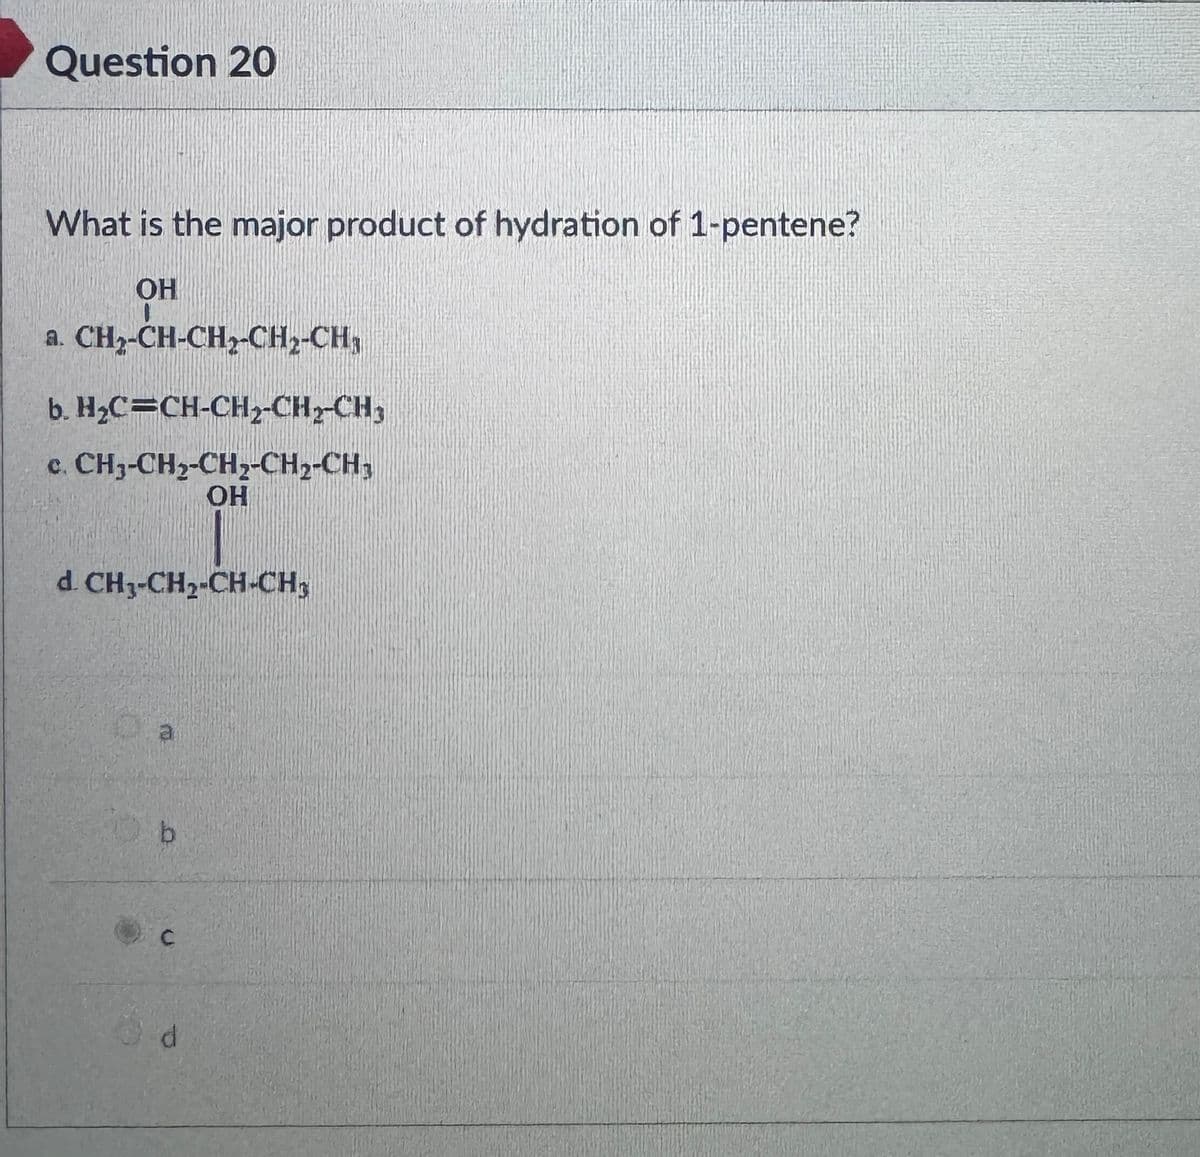 Question 20
What is the major product of hydration of 1-pentene?
OH
a. CH₂-CH-CH₂-CH₂-CH,
b. H₂C=CH-CH₂-CH₂-CH₂
c. CH3-CH2-CH2-CH2-CH,
OH
d. CH₂-CH₂-CH-CH₂
C
d